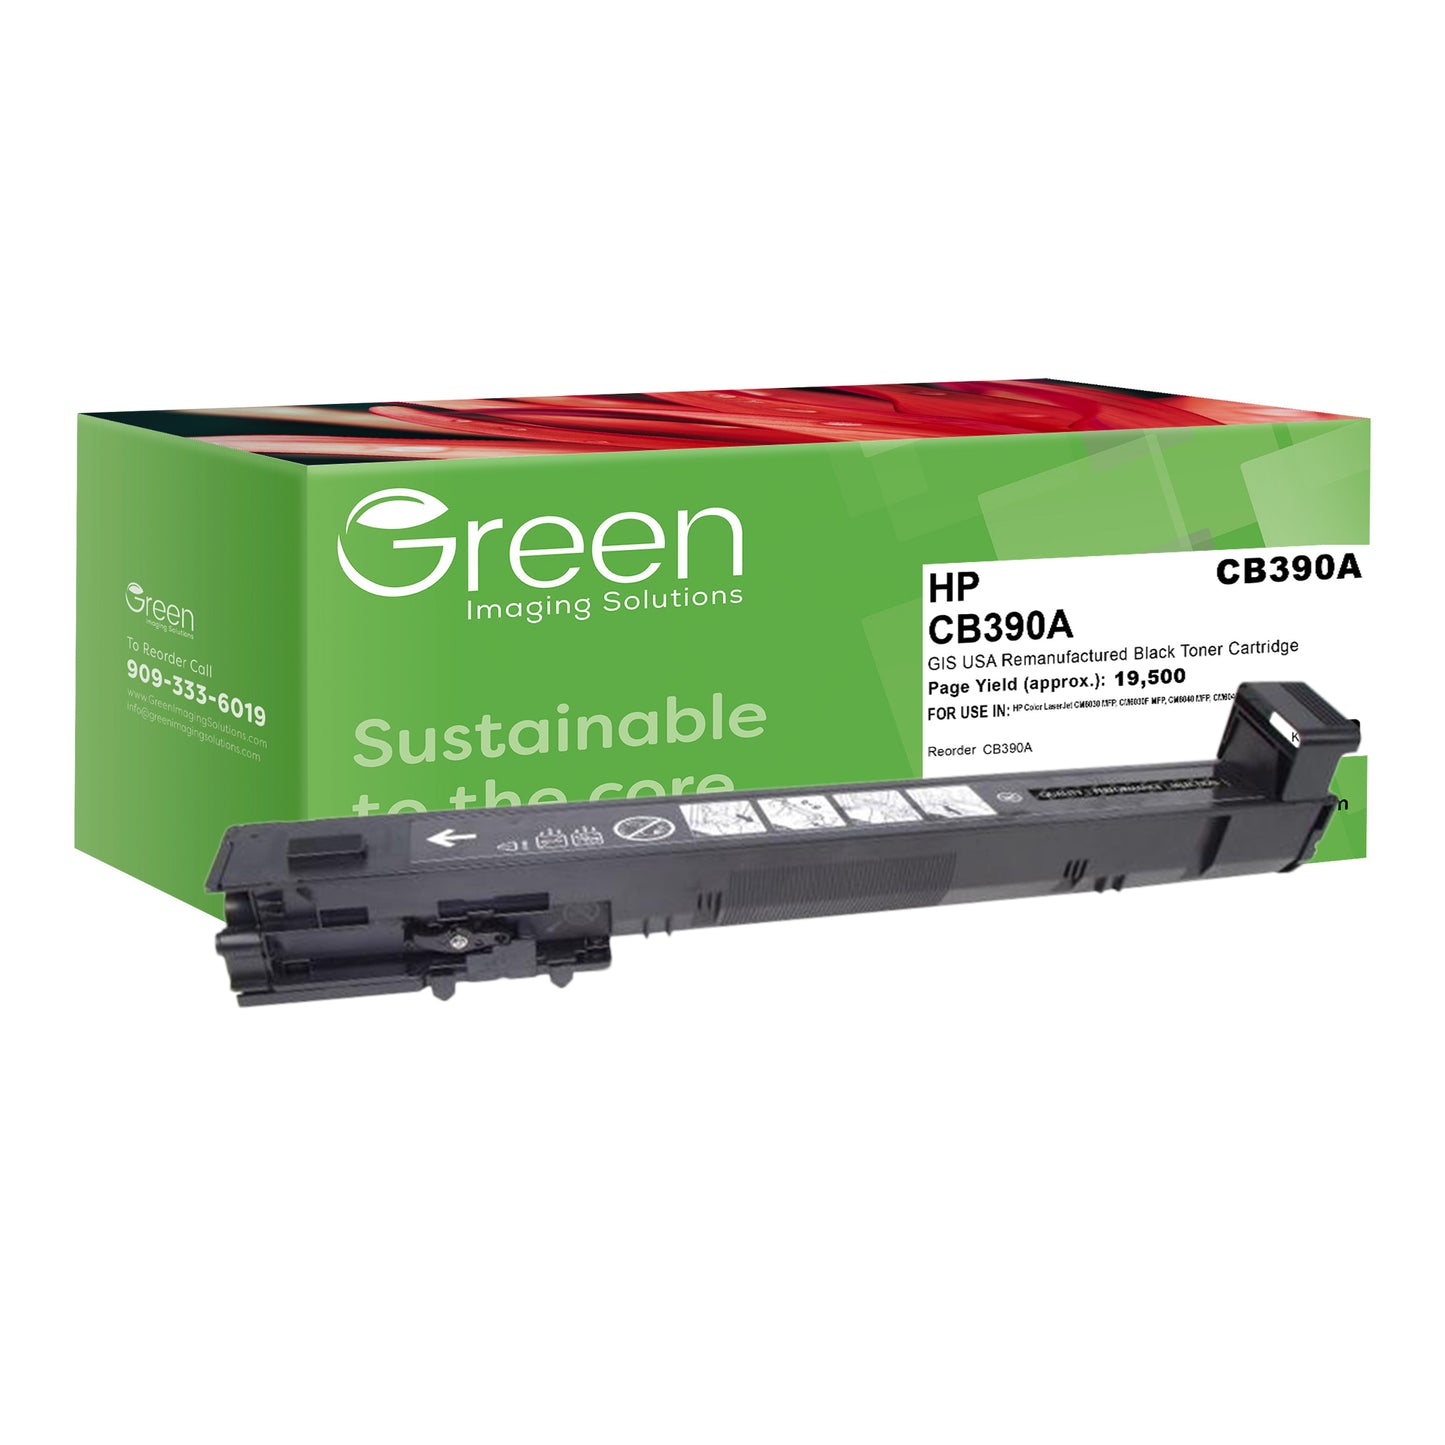 Green Imaging Solutions USA Remanufactured Black Toner Cartridge for HP 825A (CB390A)